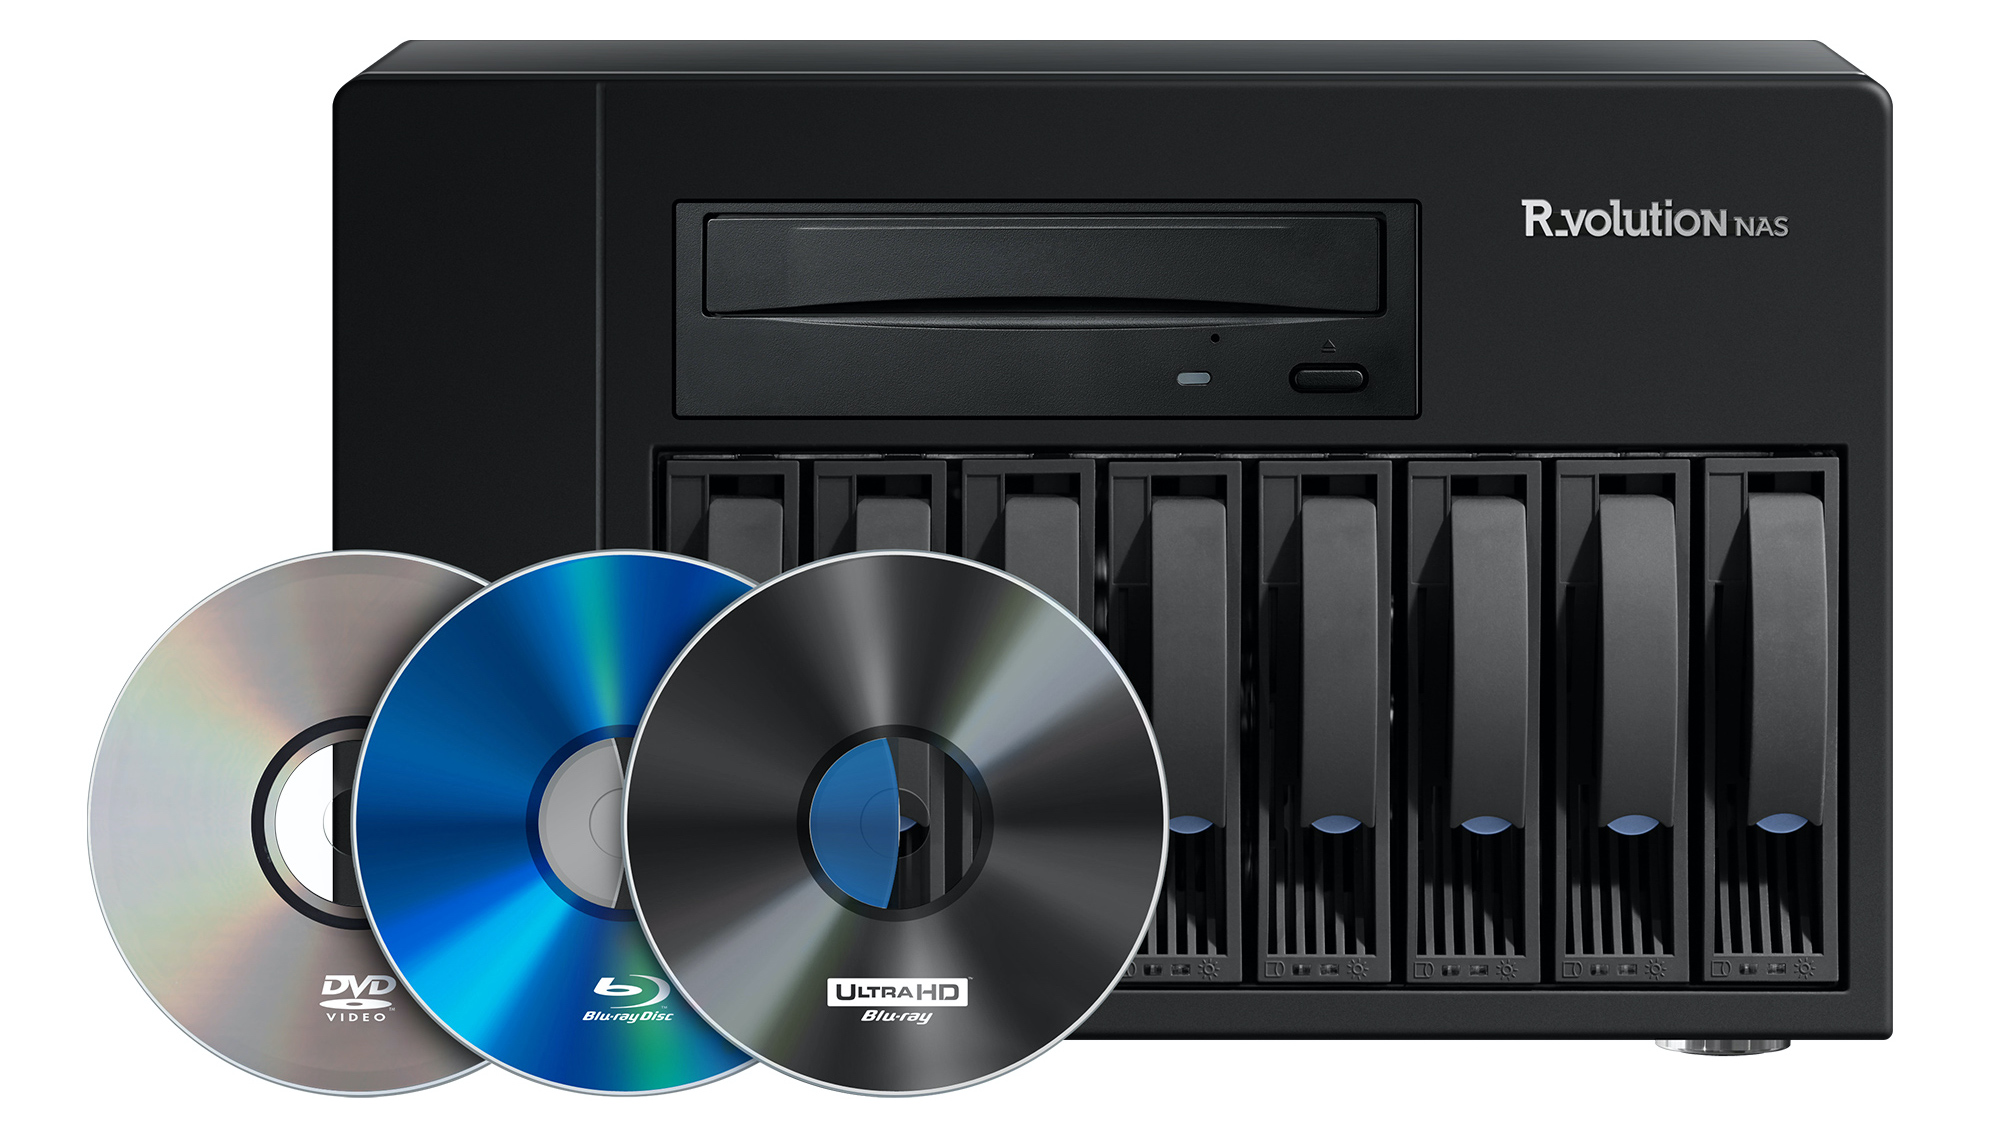 r_volution-nas-front-top-transp-750x386.png